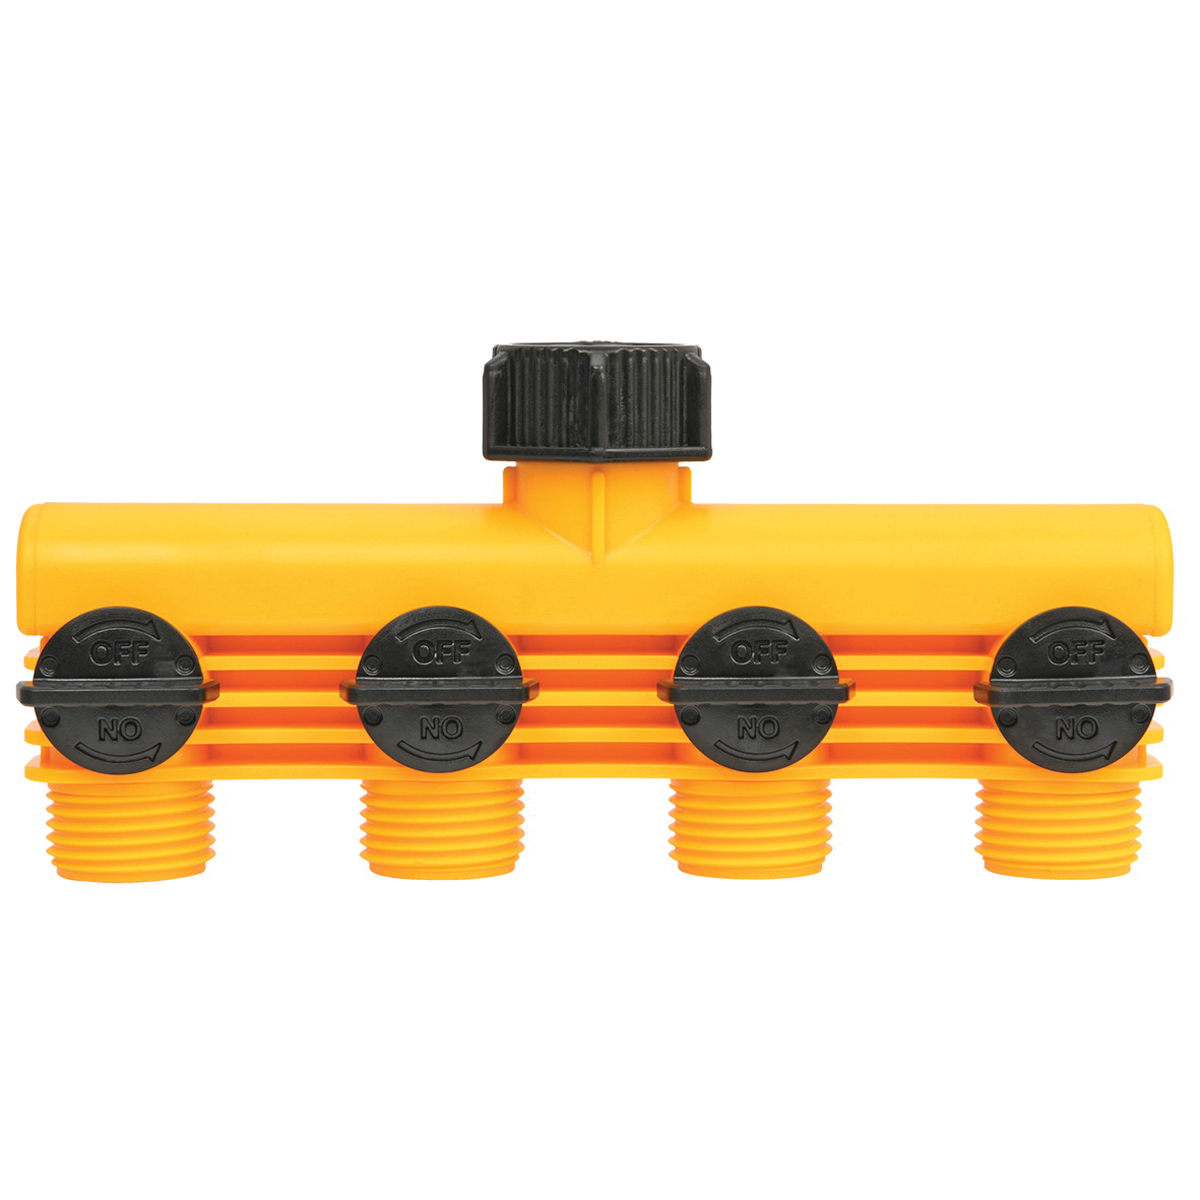 Landscapers Select YM20820 Tap Manifold Connector, 4 Way, Black/Yellow